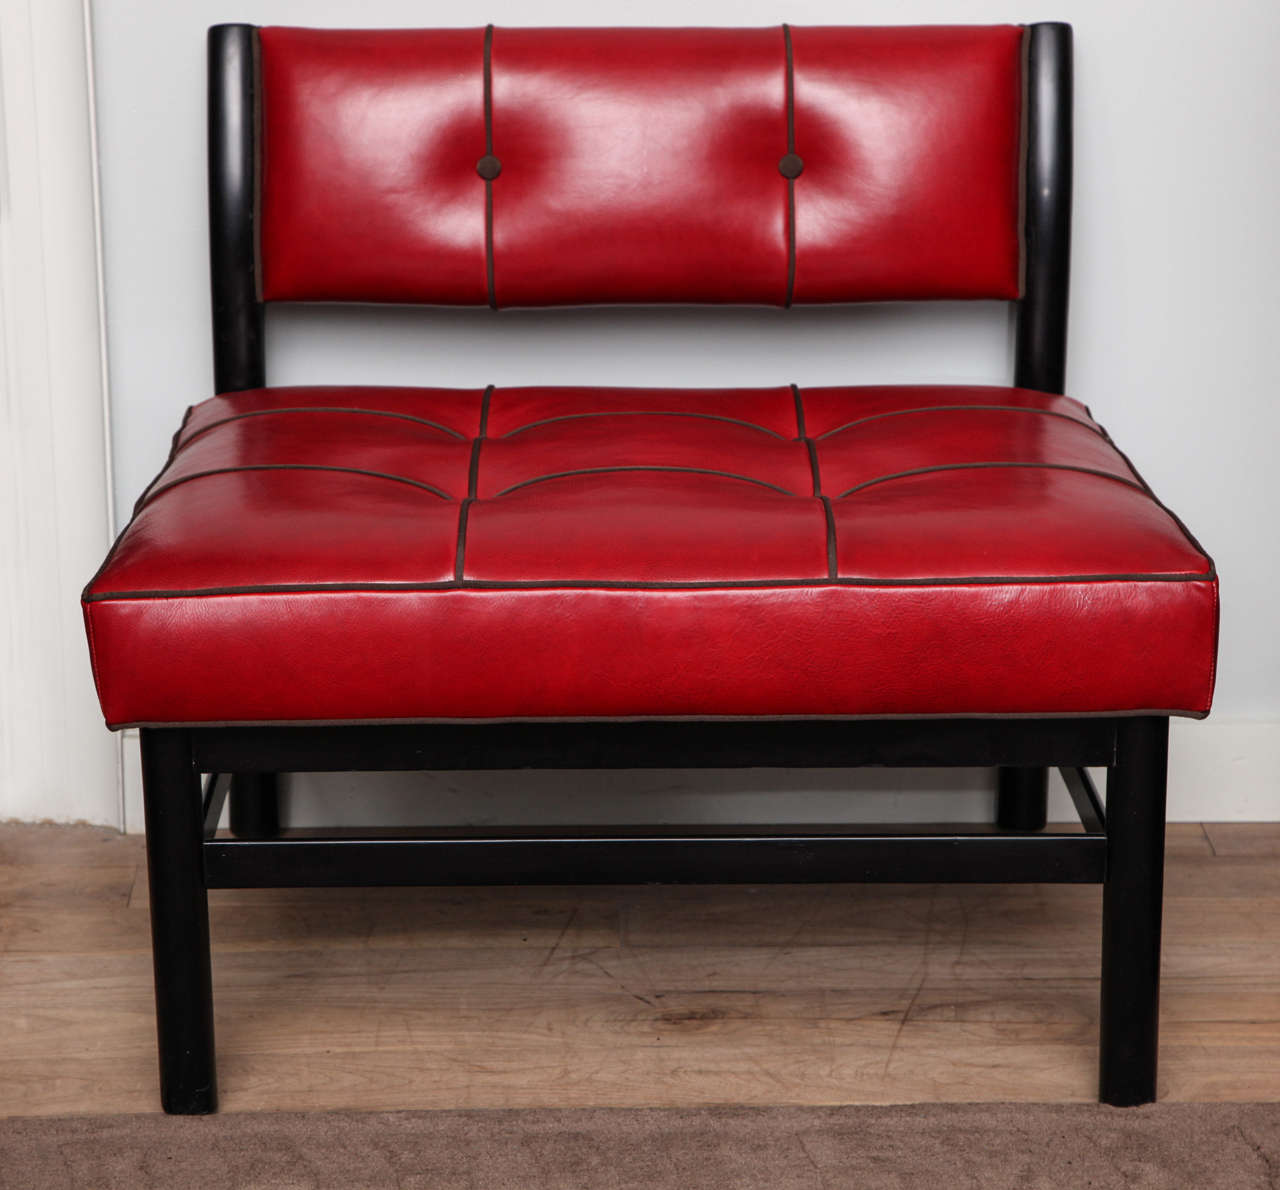 Ebonized slipper chair by Harvey Probber circa 1950 re-executed with a revised tufted back and seat cushion, red leather upholstery with espresso French grosgrain trim